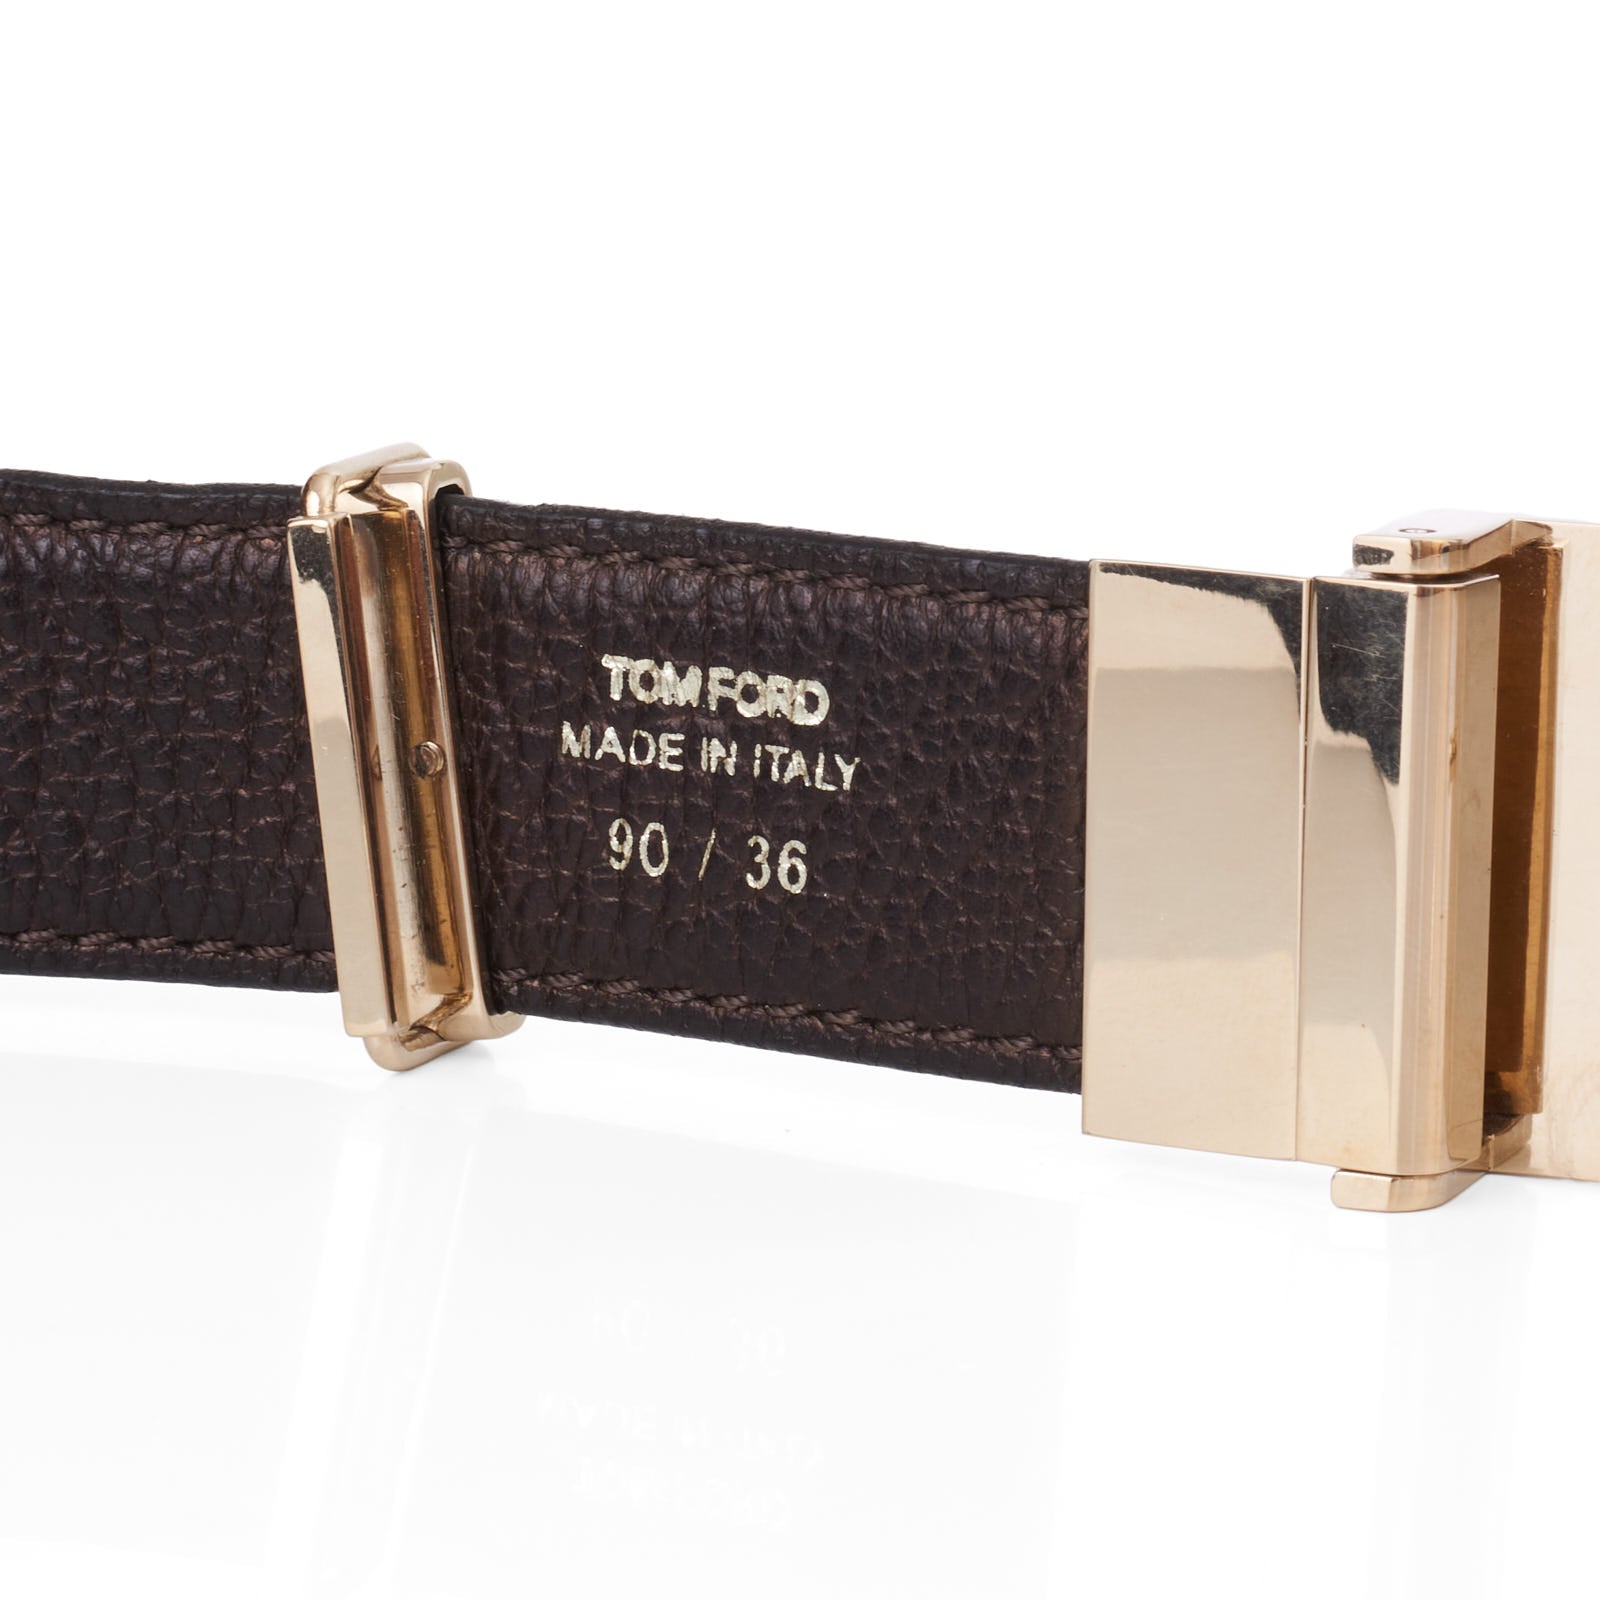 TOM FORD Brown-Black Leather Reversible Belt with Swivel Gold Buckle 36" 90cm NEW TOM FORD